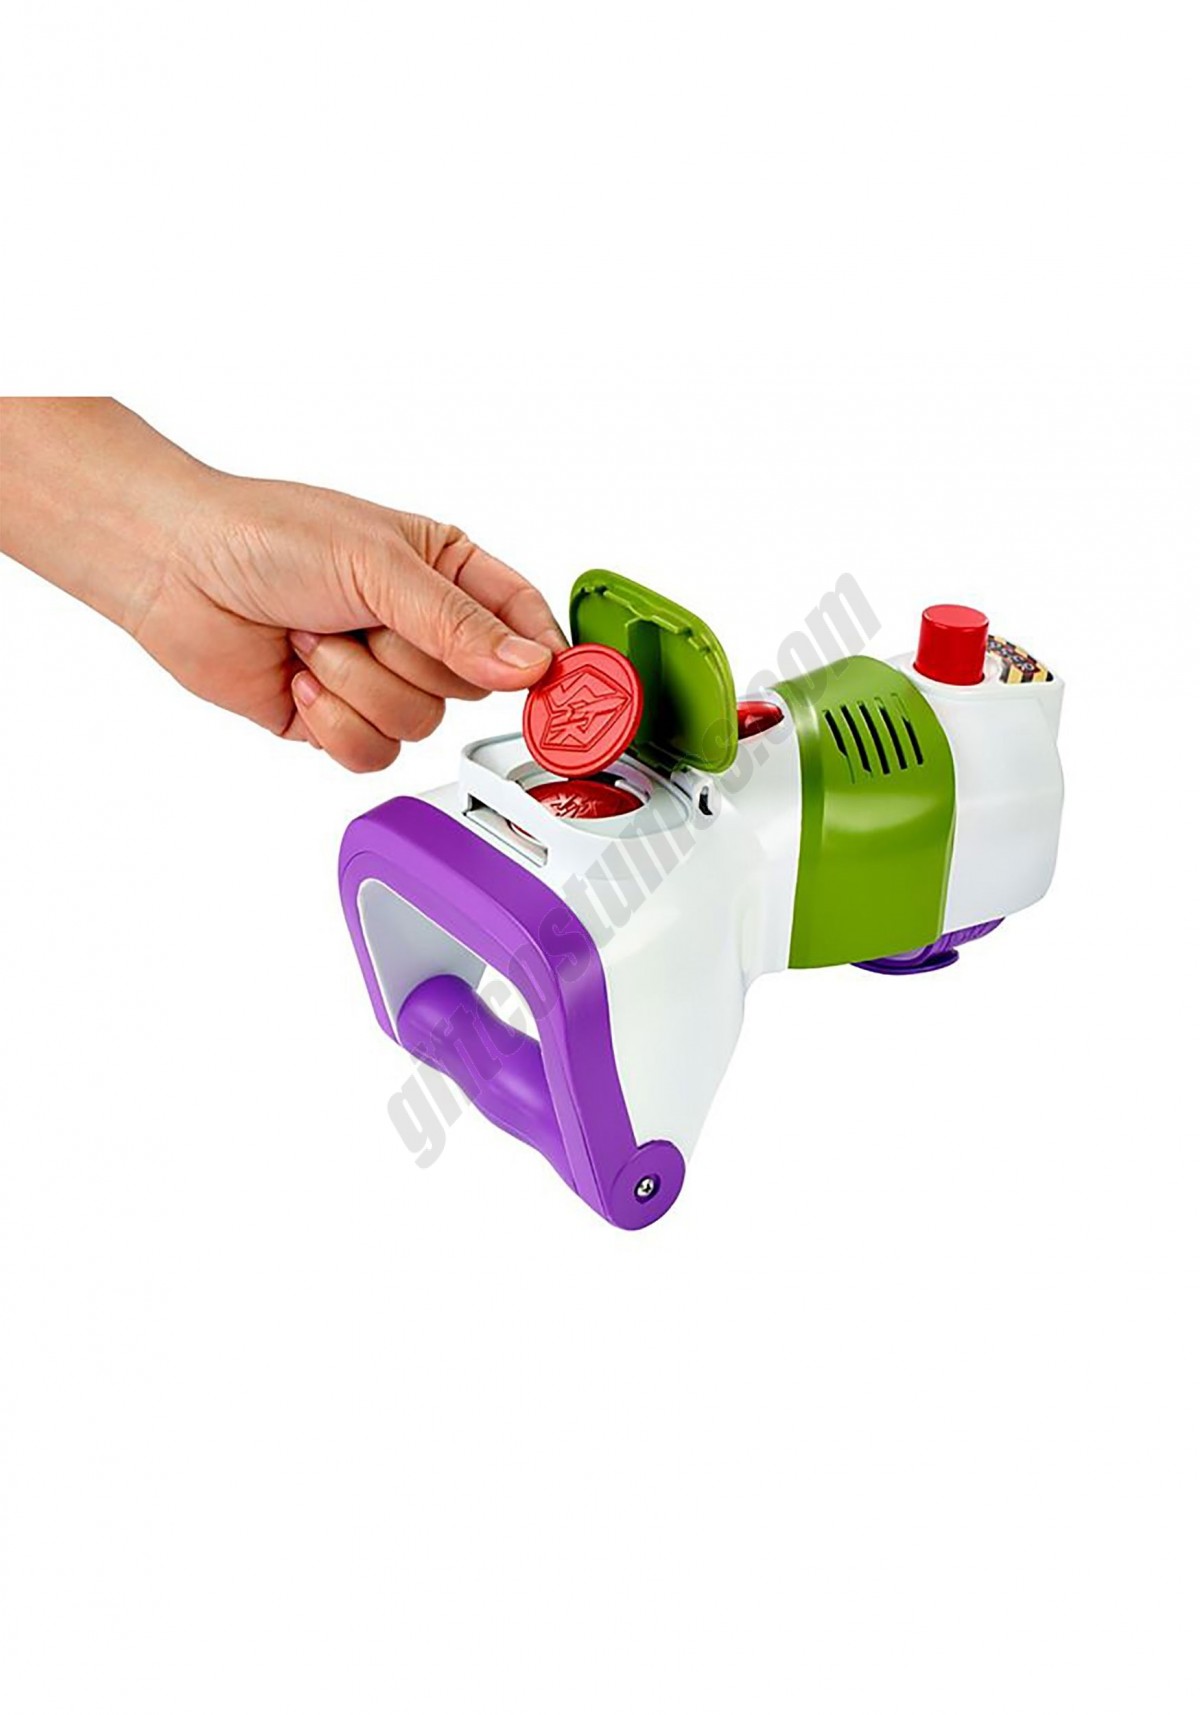 Toy Story 4 Buzz Lightyear Disc Blaster Promotions - -2